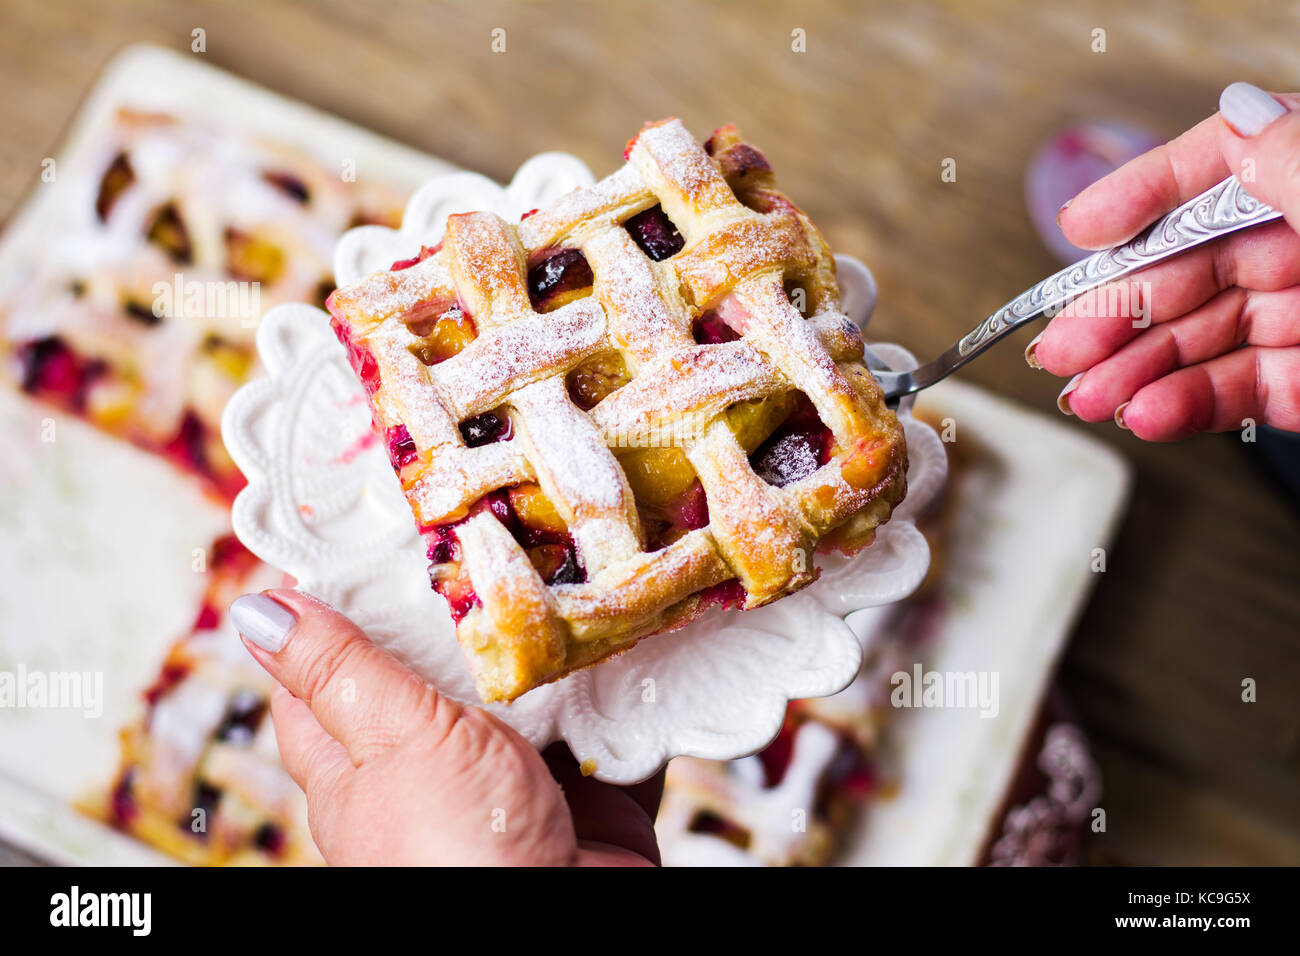 Woman serving sweet fruit pie slice on a plate Stock Photo